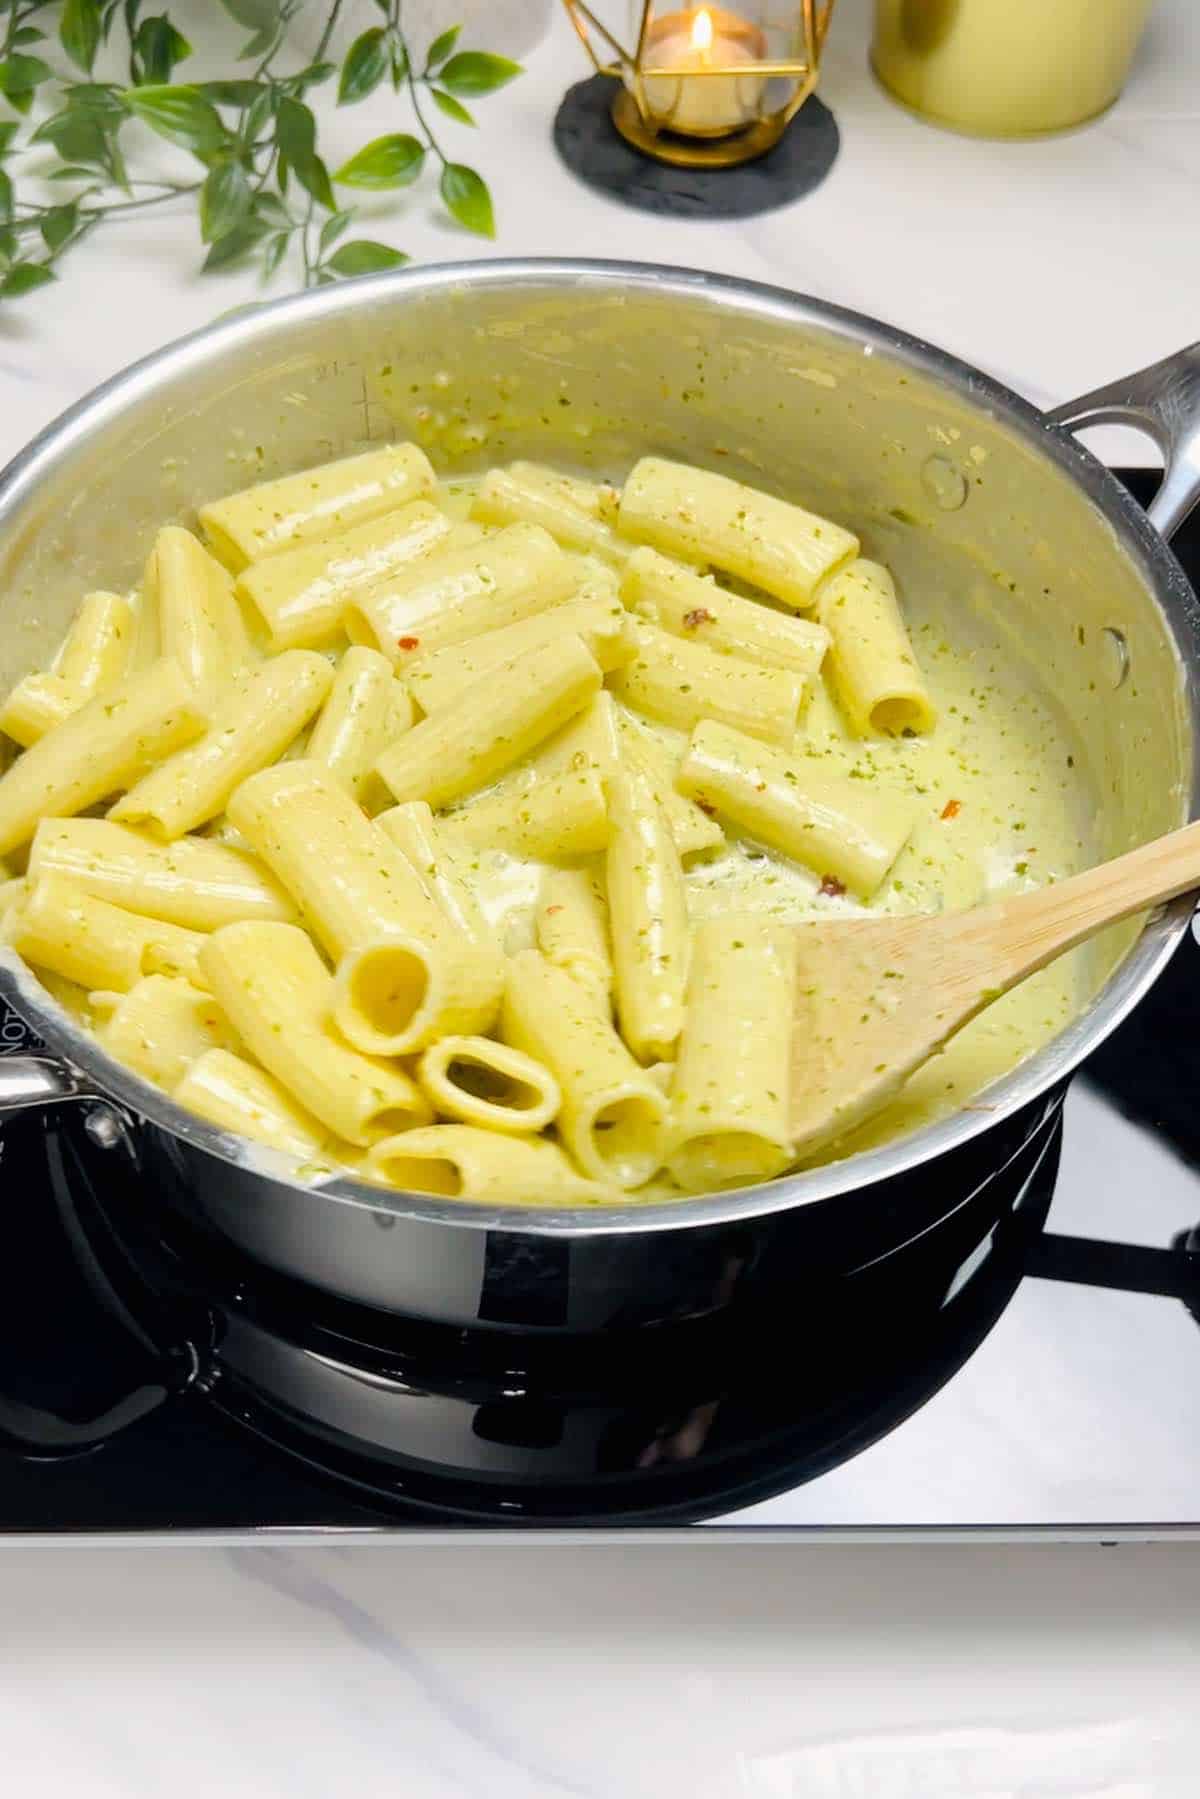 mixing cooked pasta and truffle pesto sauce together